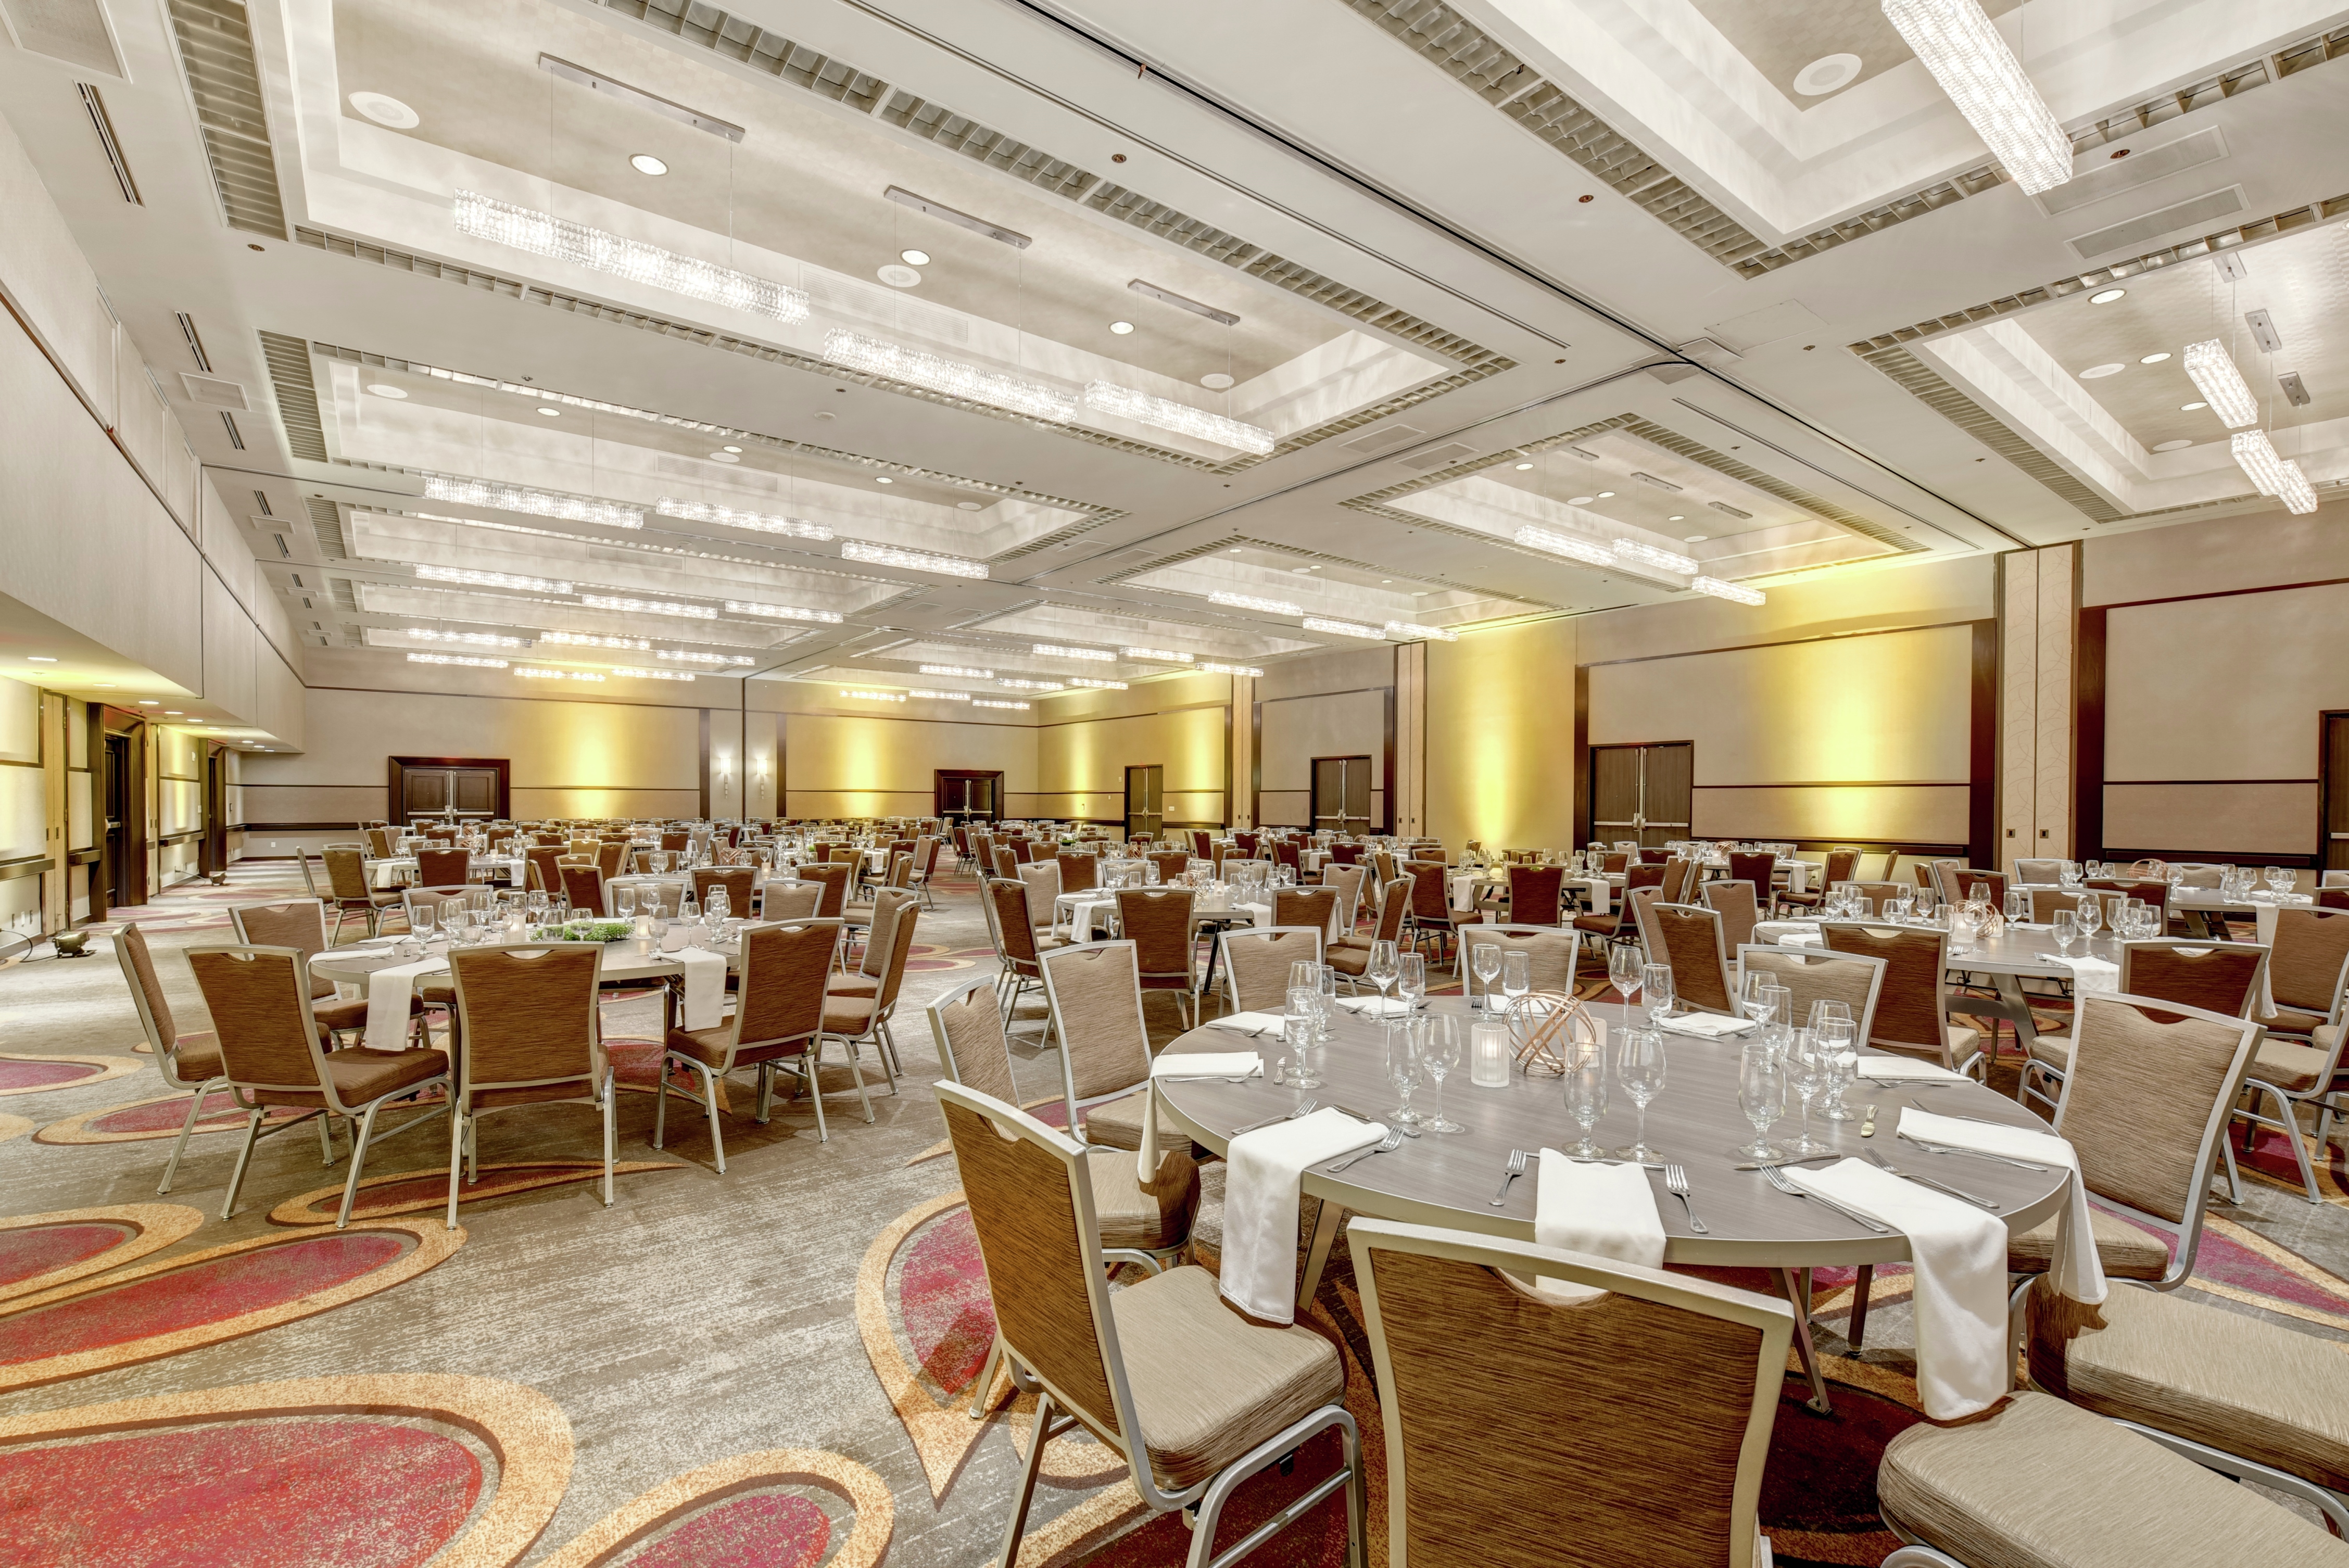 DoubleTree Hotel Ballroom with Round Tables and Chairs